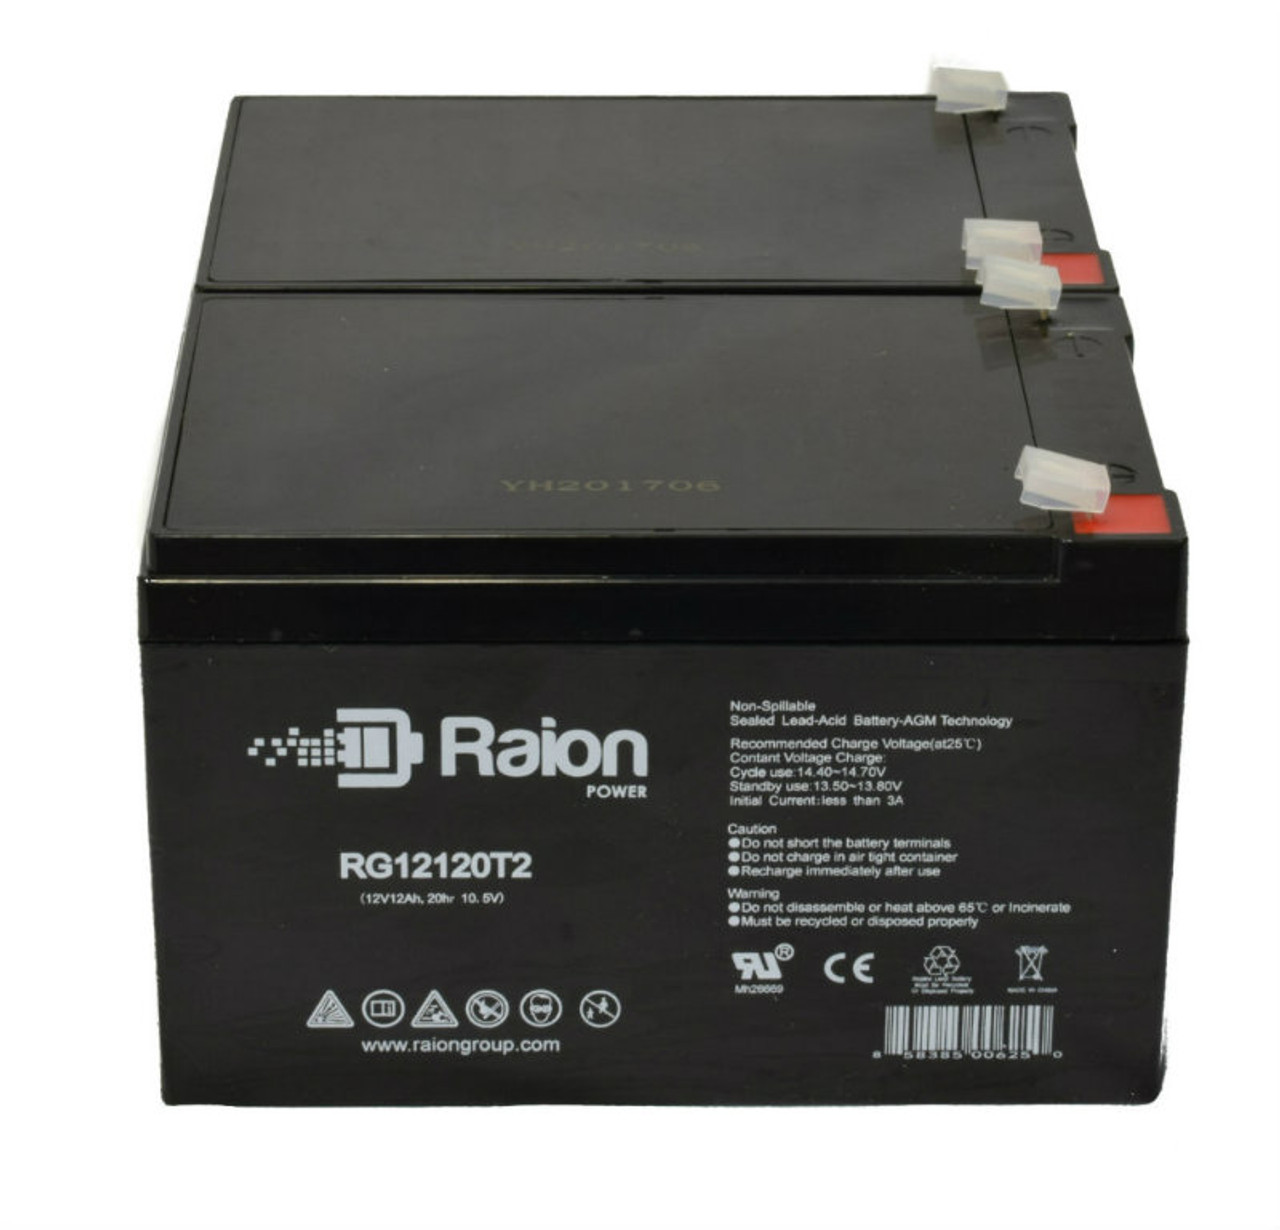 Raion Power RG12120T2 12V 12Ah Replacement Medical Equipment Battery for Hill-Rom Intellidrive 68437 - 2 Pack